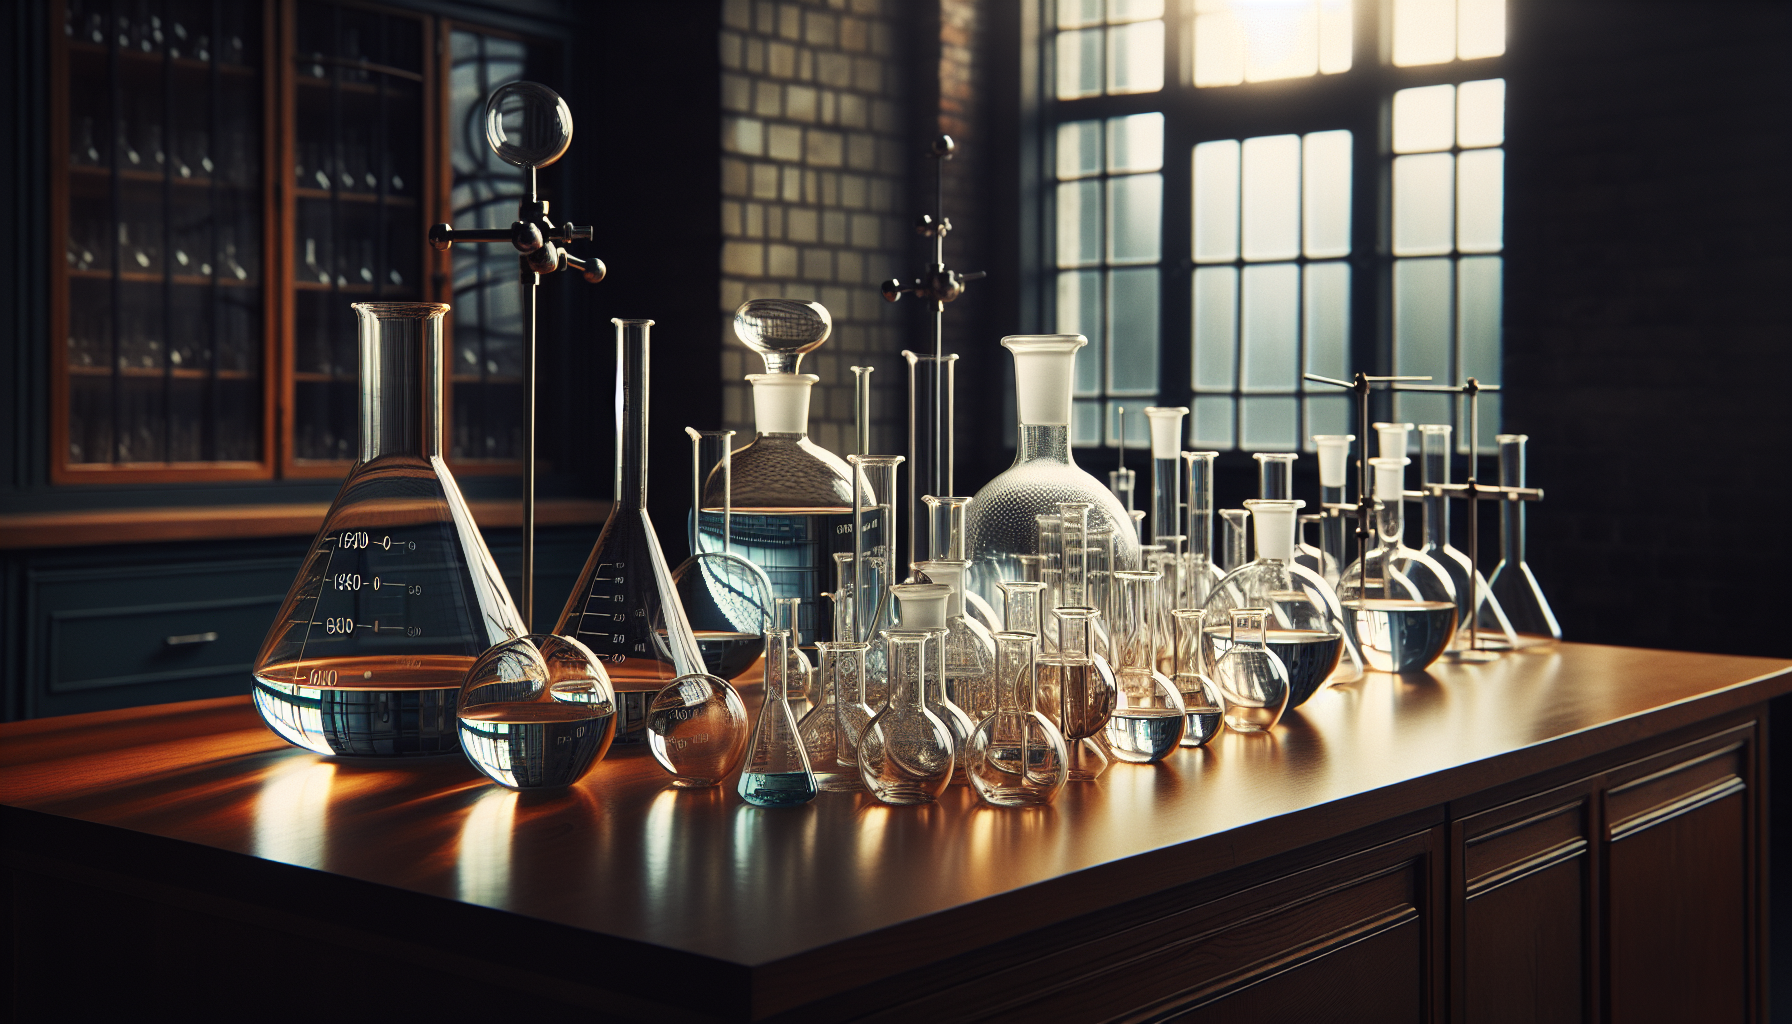 Glassware including beakers, flasks, and graduated cylinders for chemistry experiments